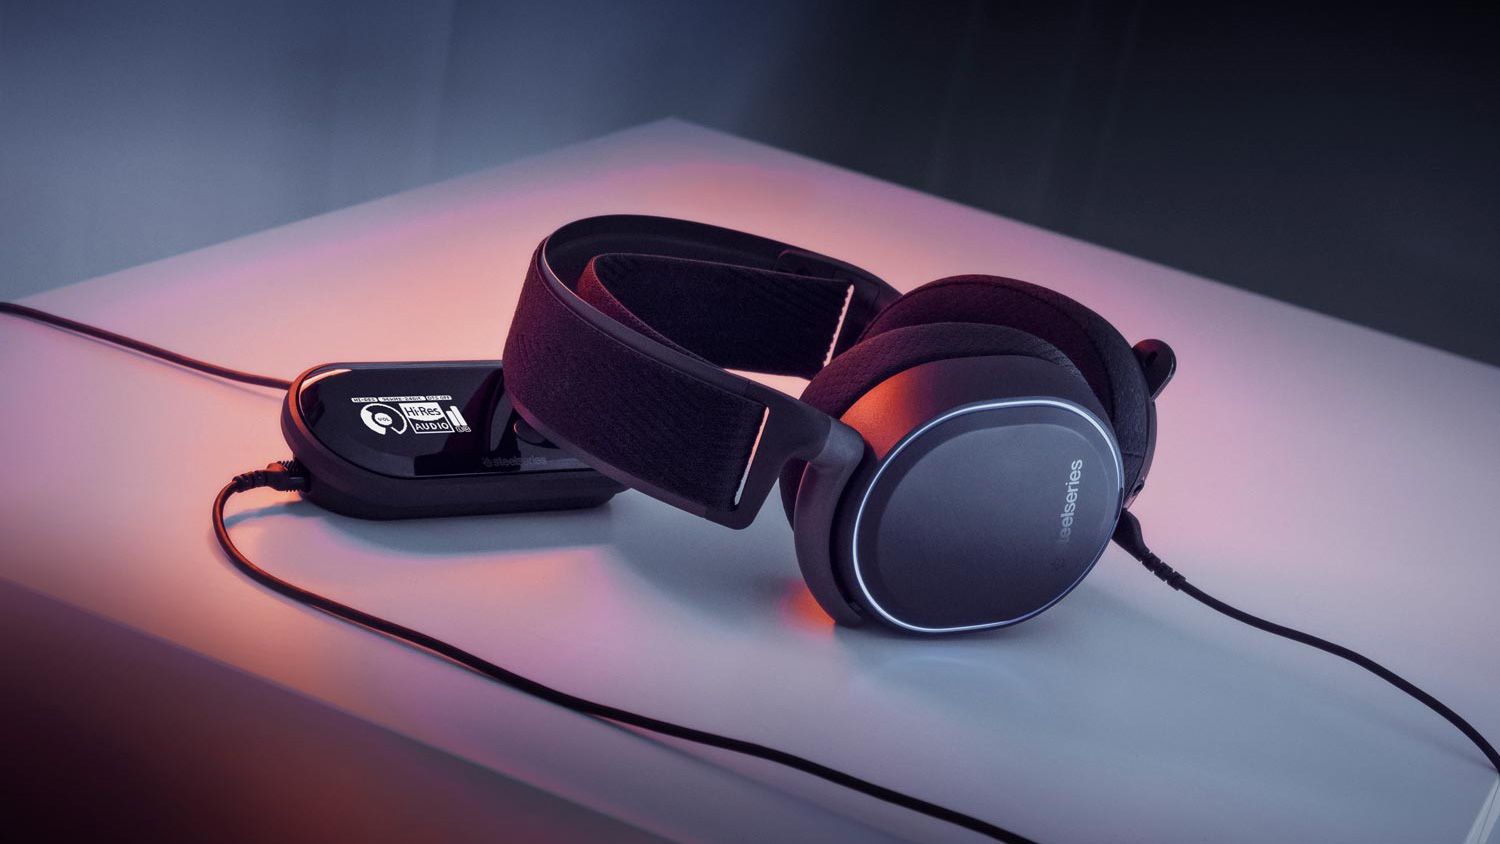 Best headsets for PS5: SteelSeries Arctis Pro + GameDAC